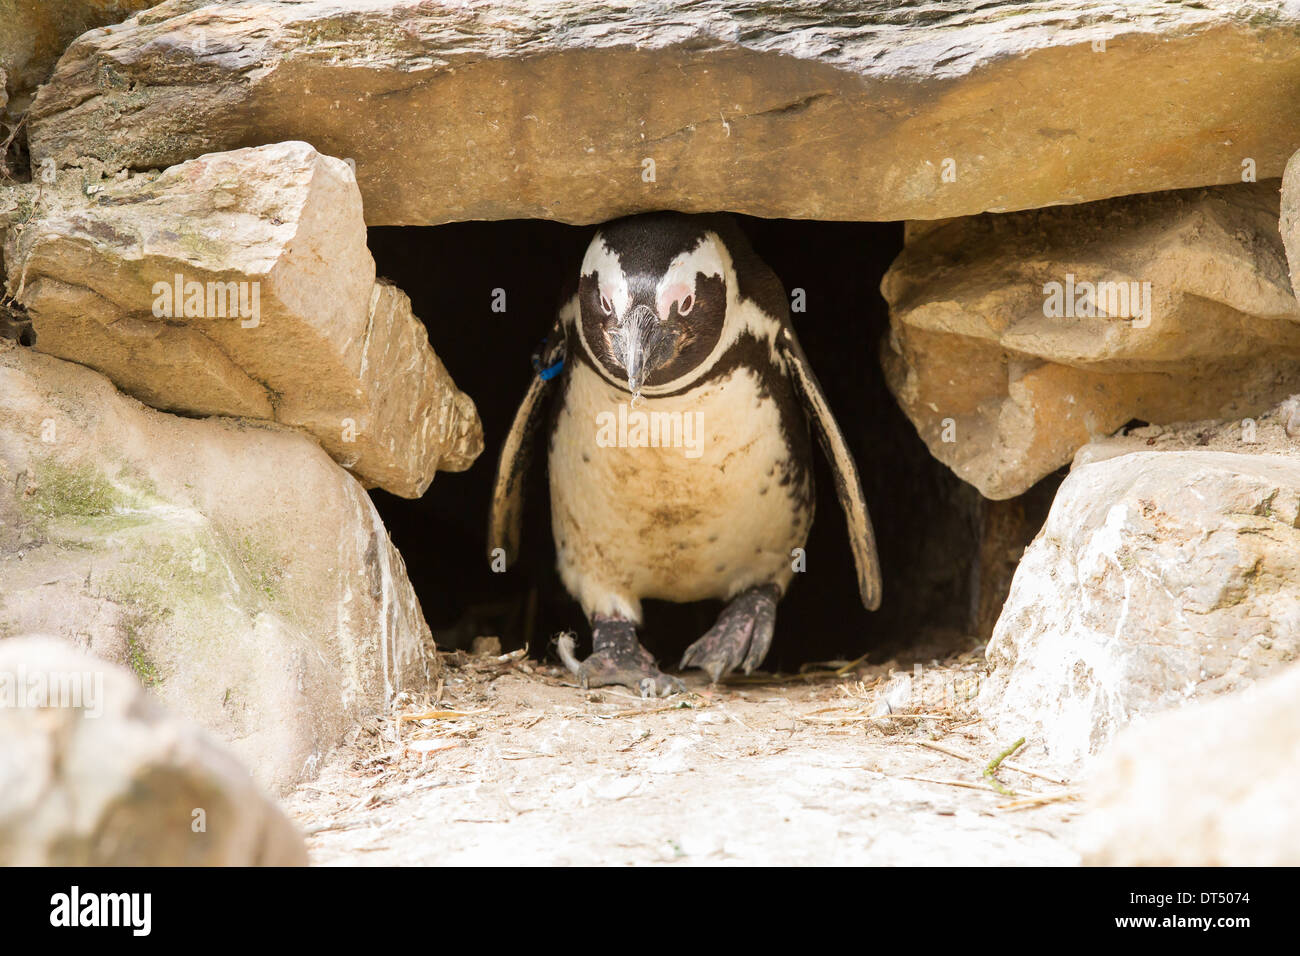 African penguin in it's nest in a zoo Stock Photo